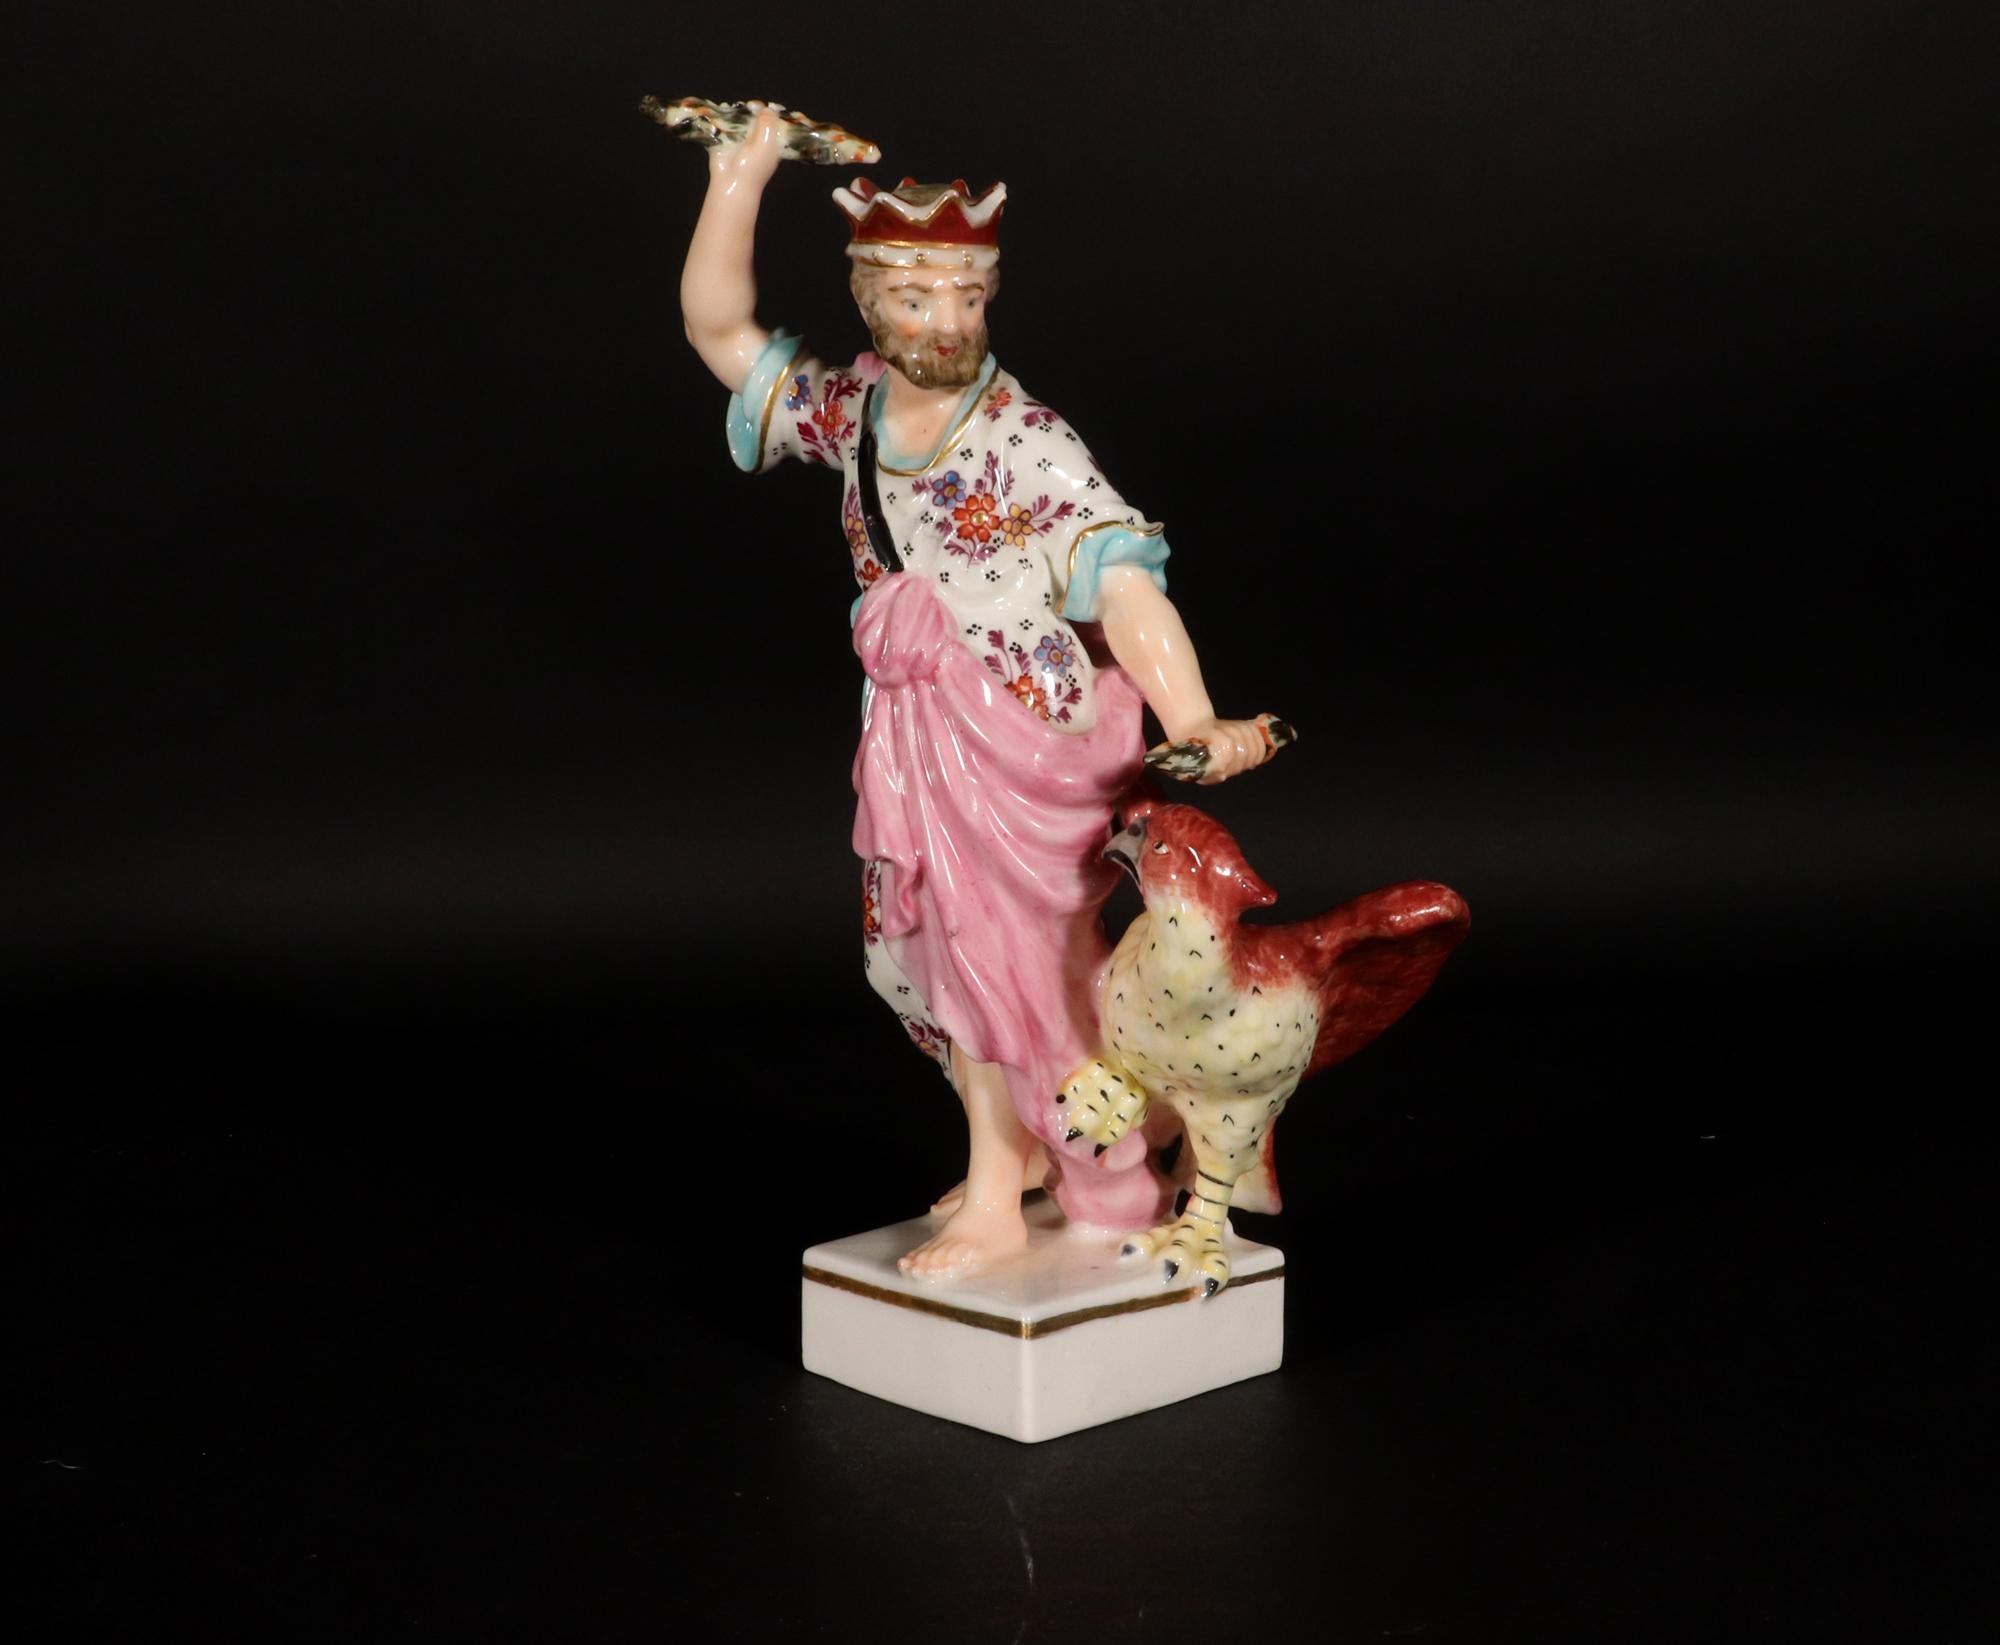 18th-century Derby Porcelain of Jupiter,
Circa 1775-80

The Derby porcelain figure depicts the mythical figure of Jupiter.  Jupiter stands on a square base with his right arm extended above his head holding a thunder bolt. while his left hand holds